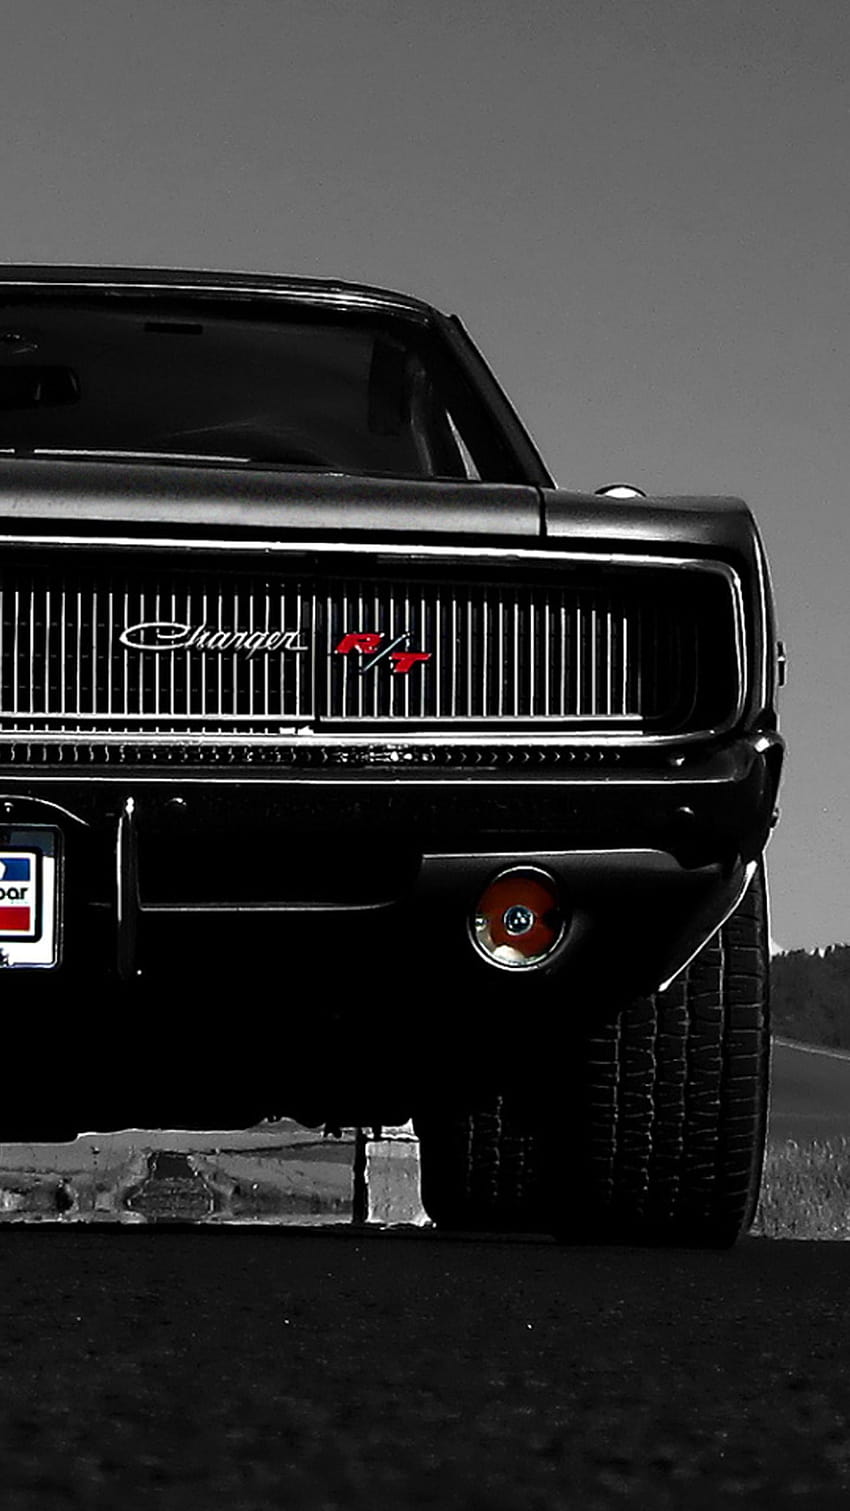 Charger RT, Dodge Charger R T, Dodge, Black, Tires, Muscle Cars, black classic cars HD phone wallpaper